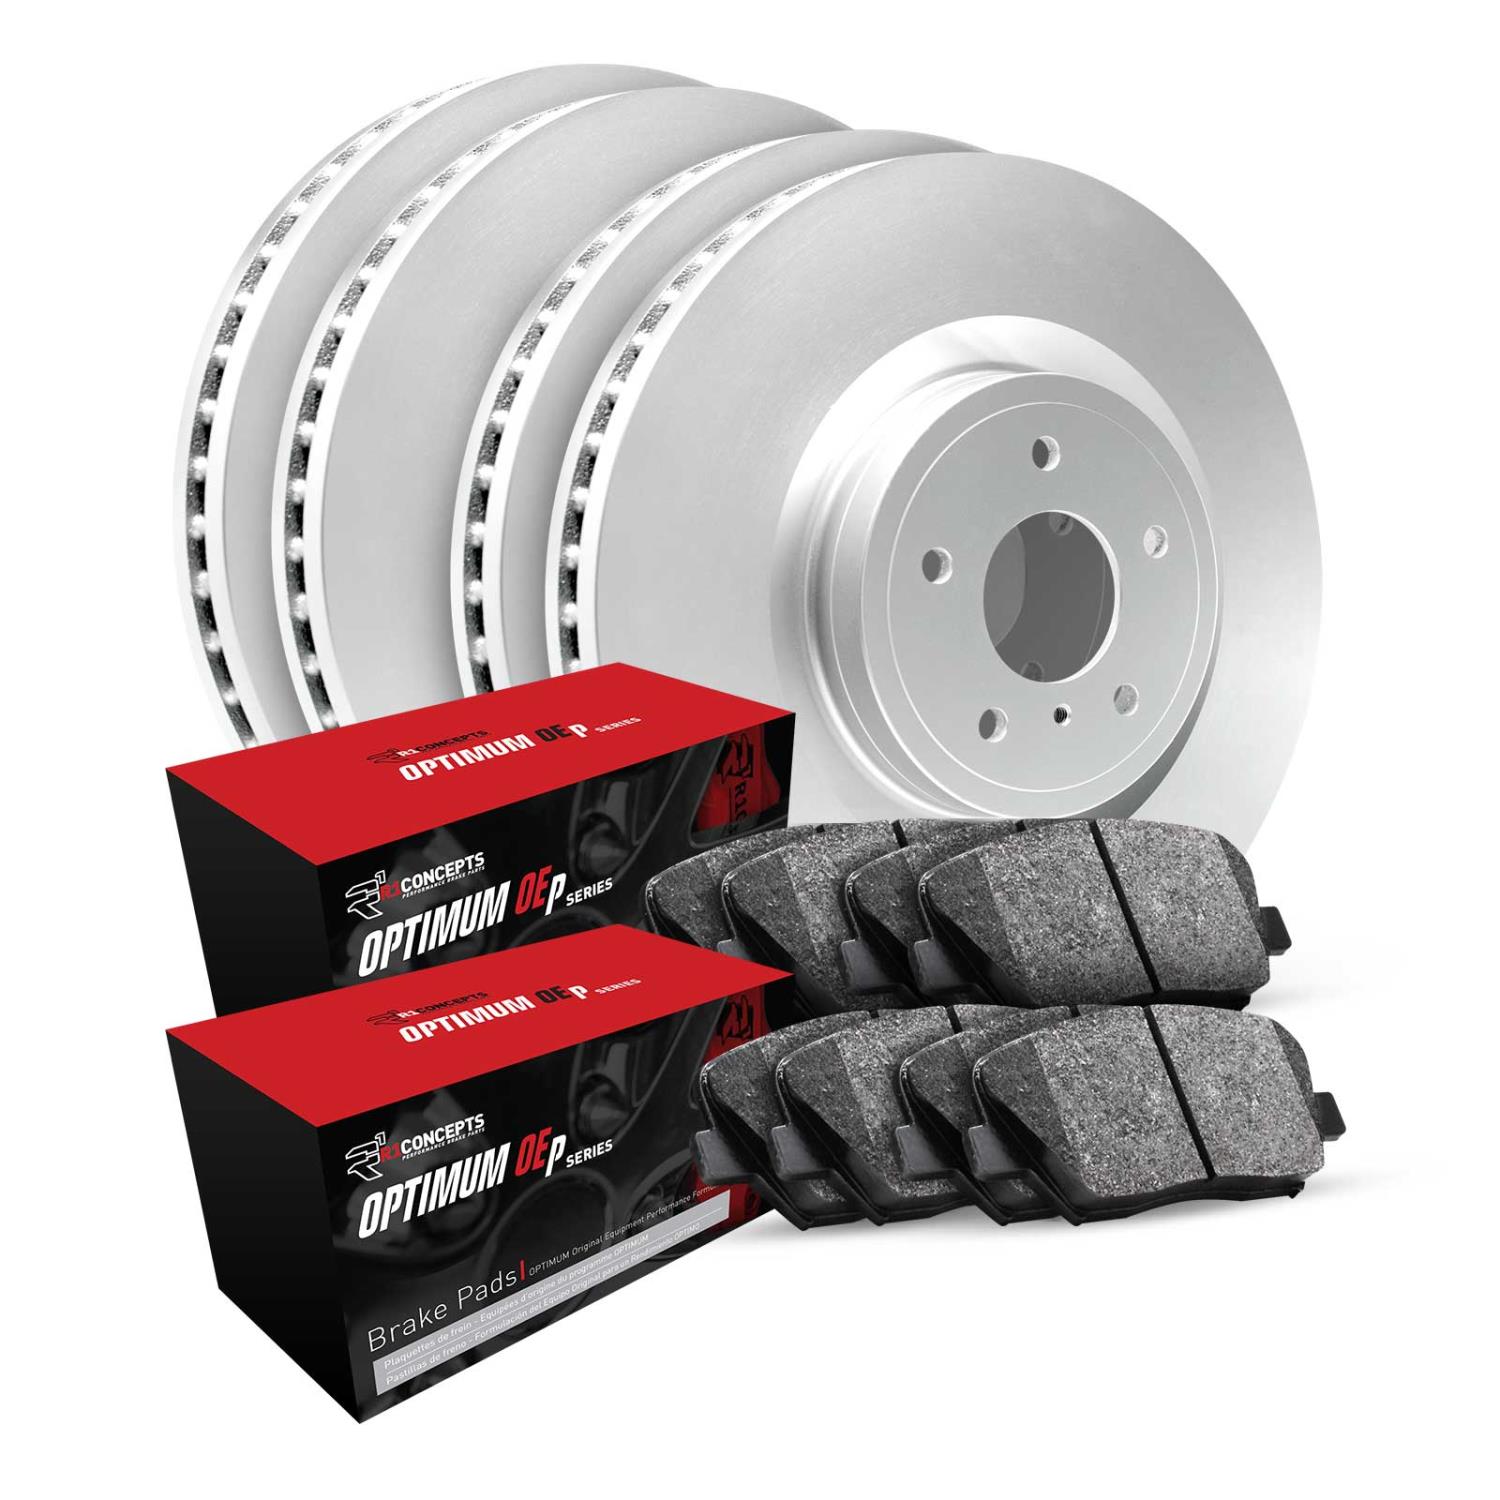 GEO-Carbon Brake Rotor Set w/Optimum OE Pads, Fits Select Mitsubishi, Position: Front & Rear